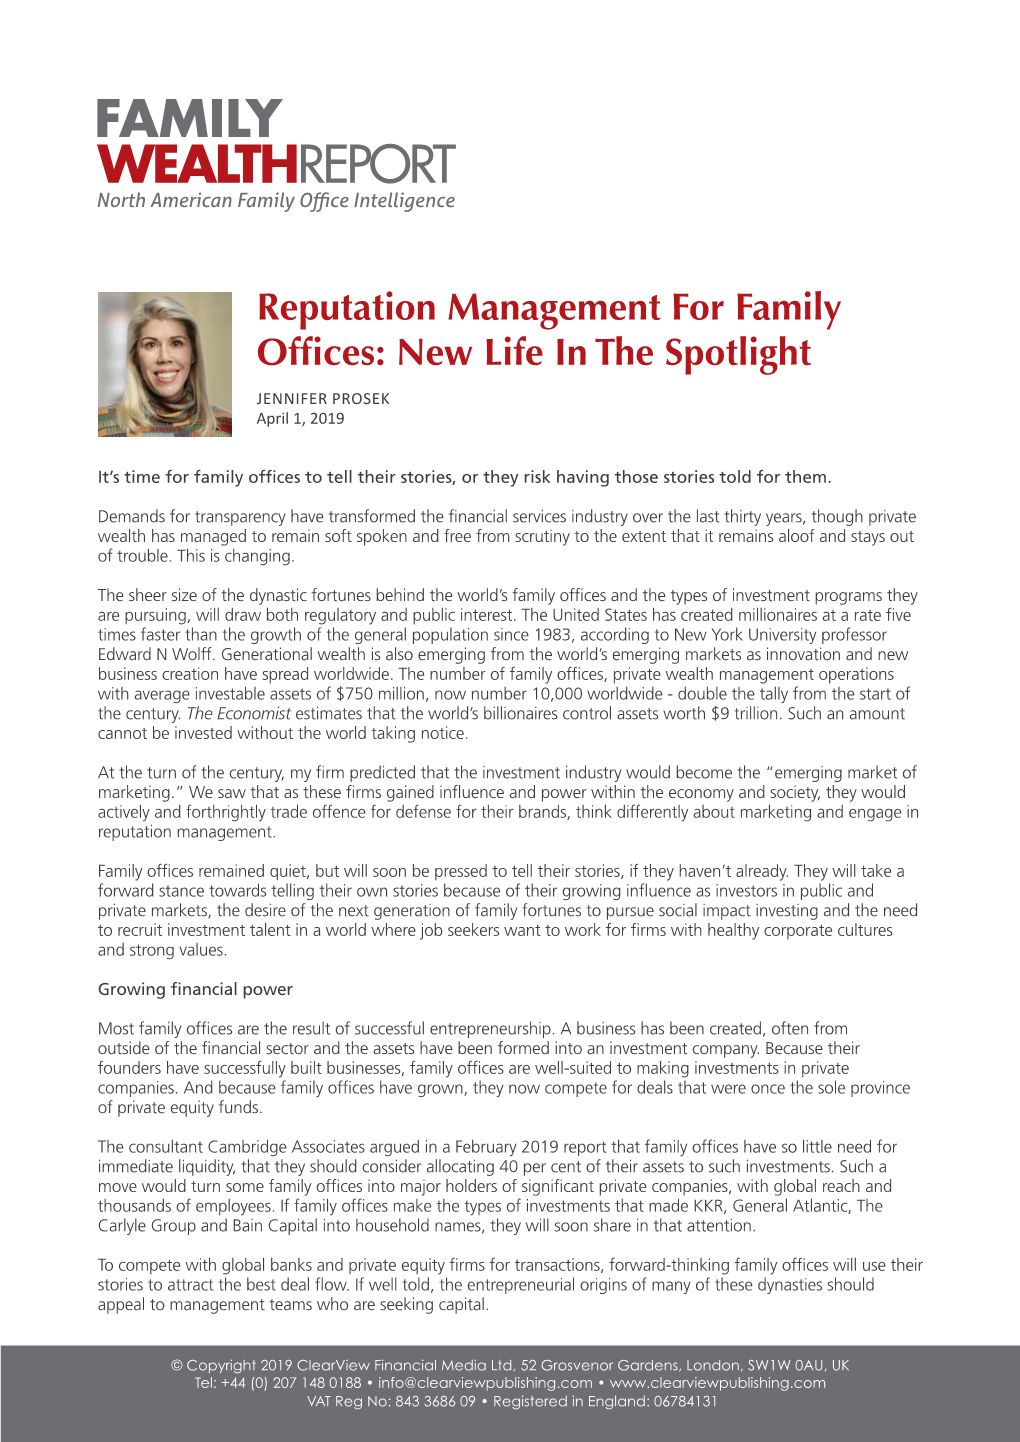 Reputation Management for Family Offices: New Life in the Spotlight